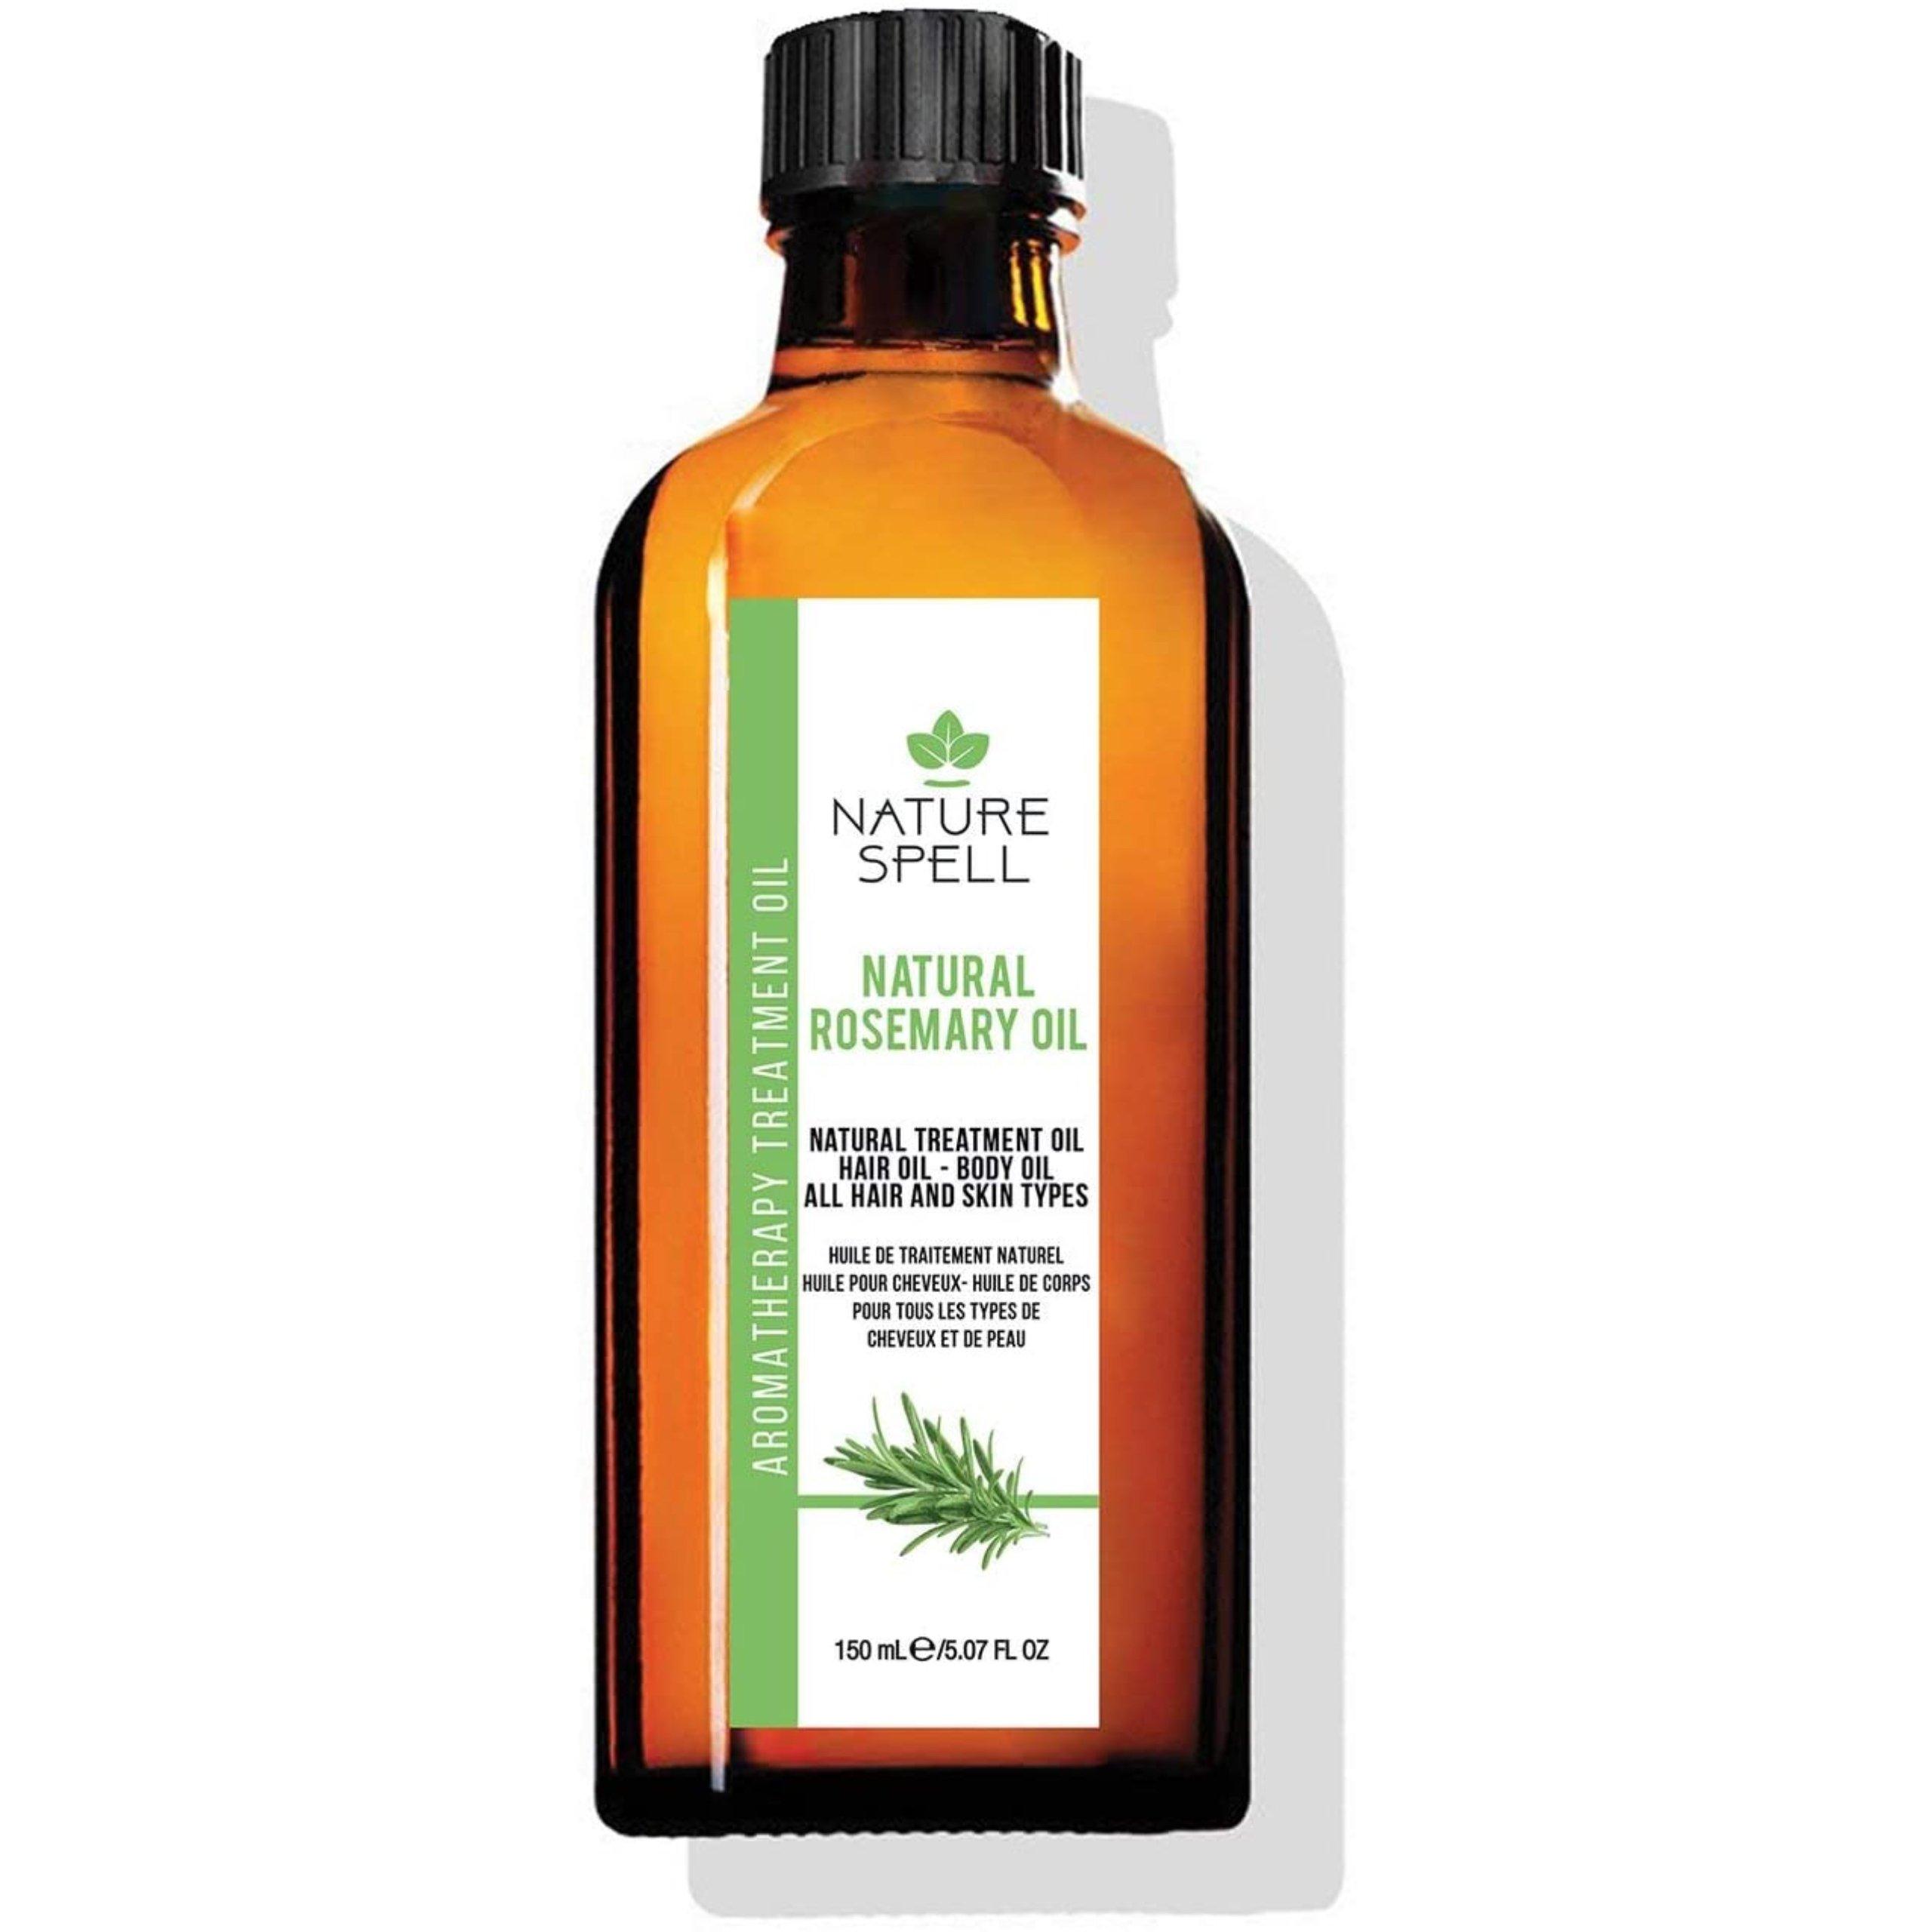 Hairstyling Rosemary Oil For Hair And Skin 150ml Nature Spell 